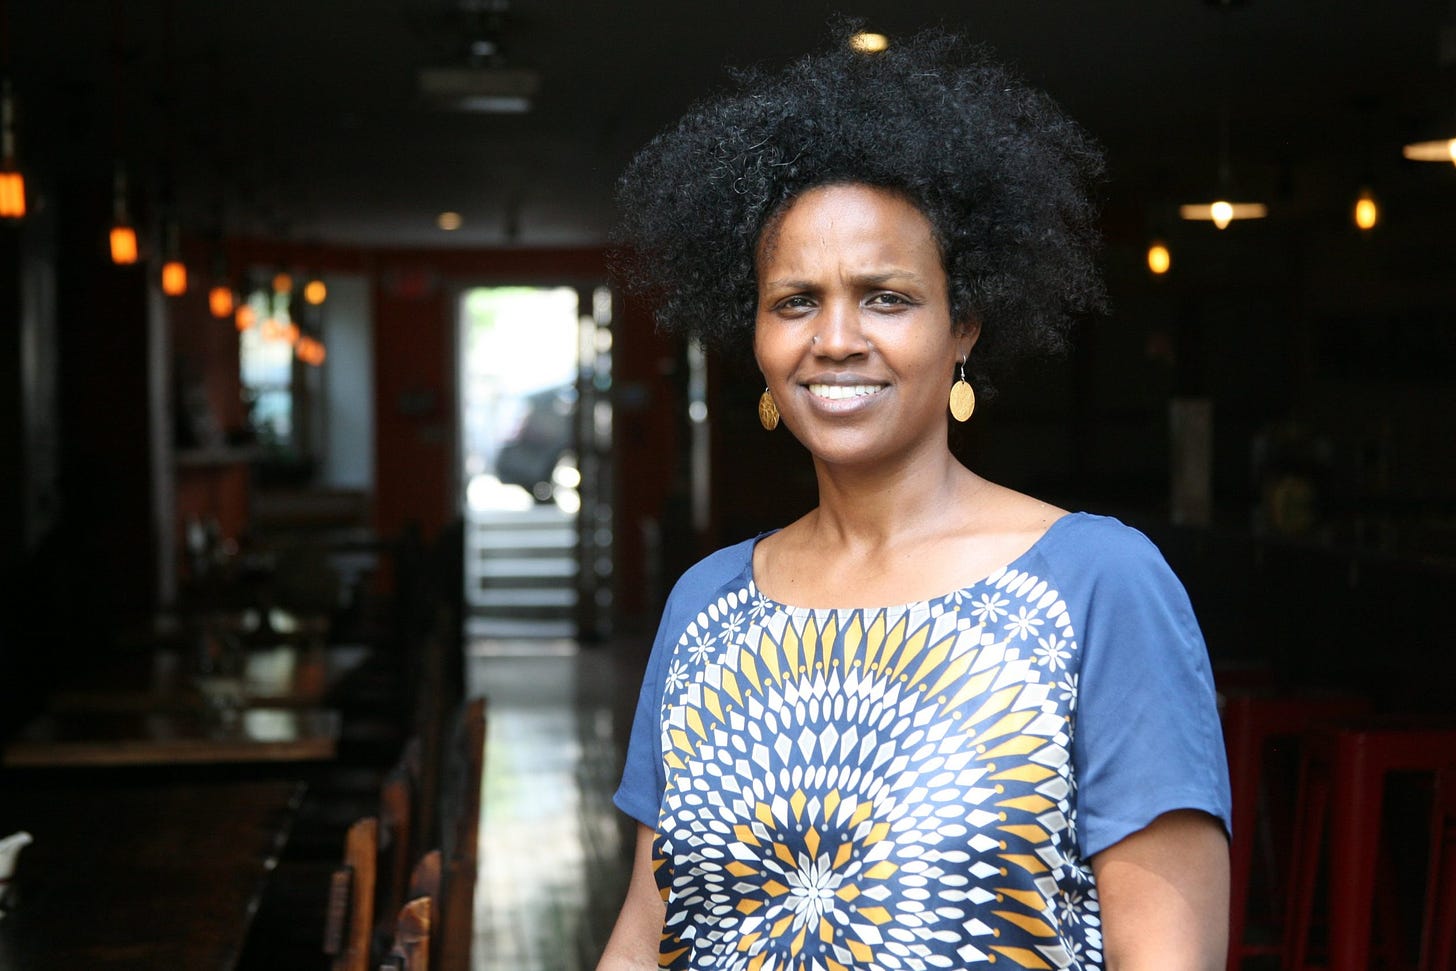 Chef Beejhy smiles wearing a blue and yellow shirt in her restaurant, Tsion Cafe